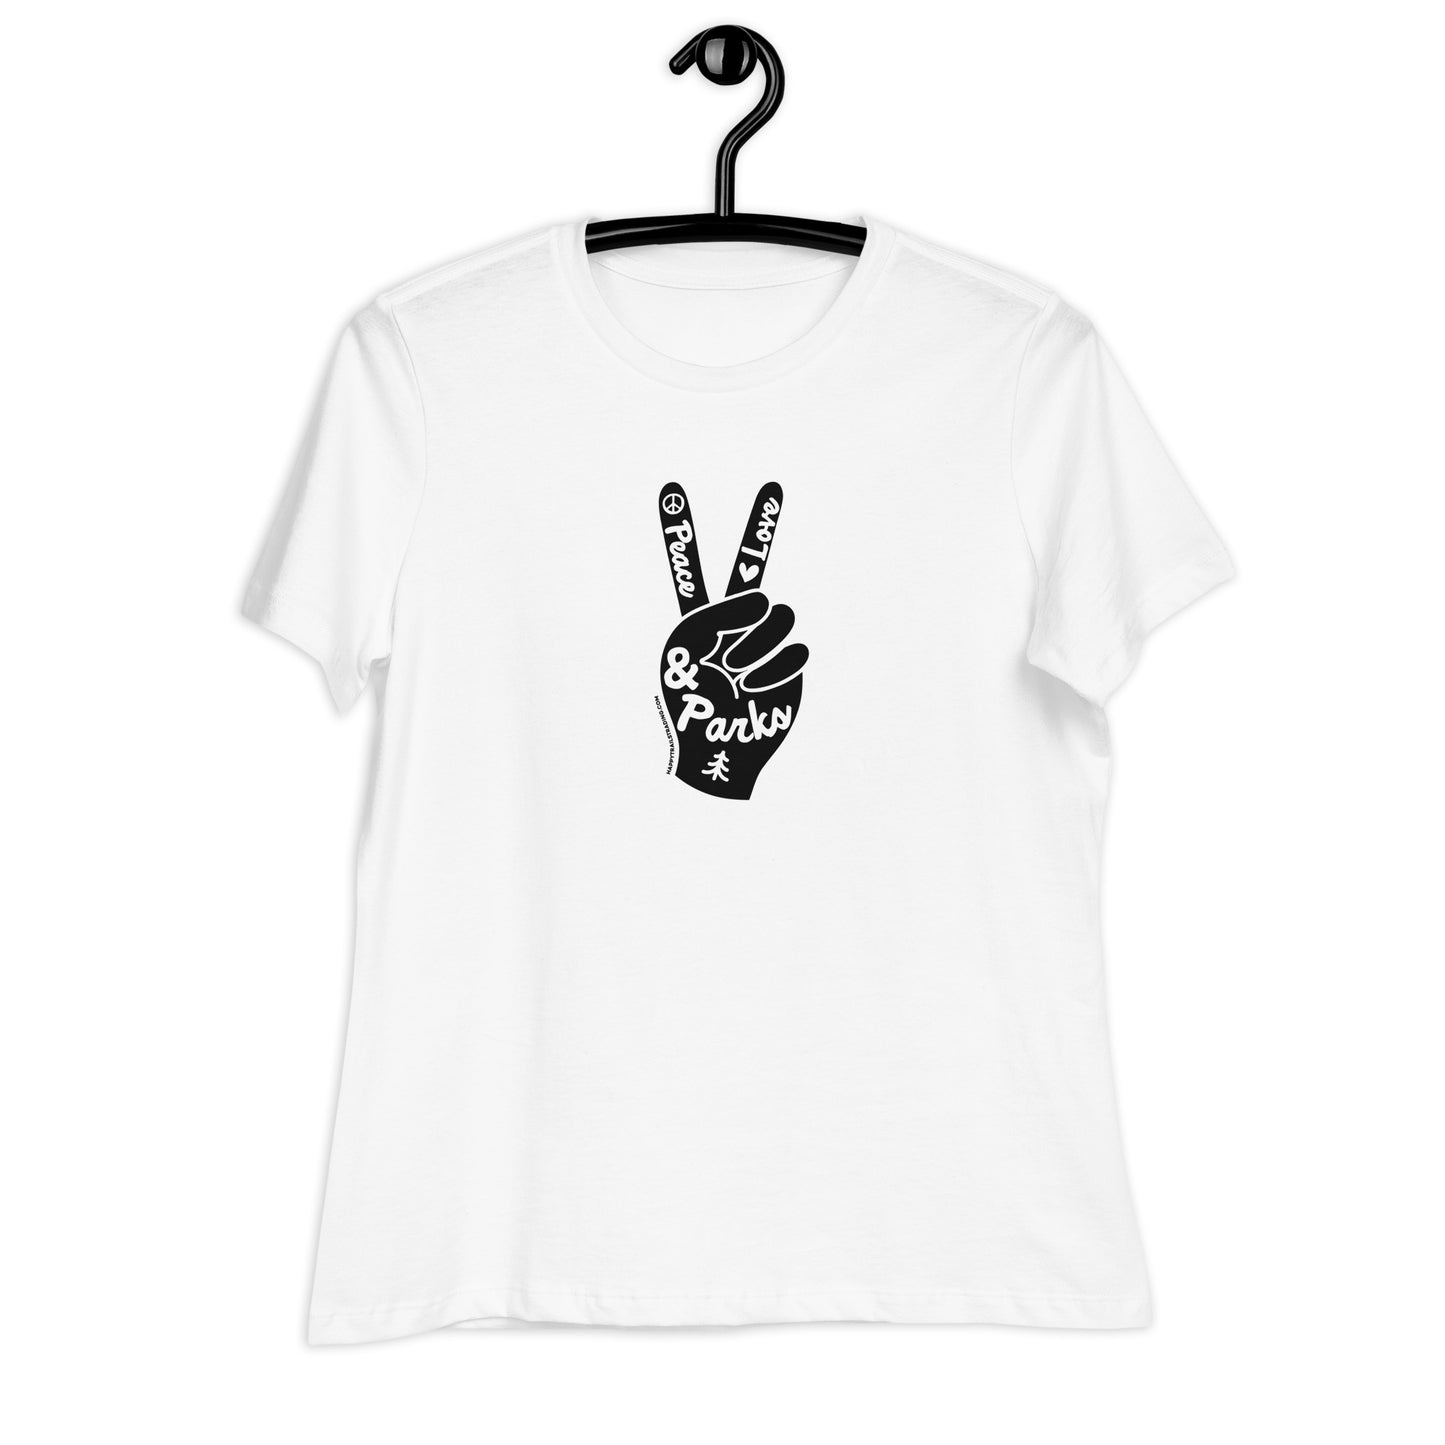 Peace, Love & Parks - Women's Relaxed T-Shirt